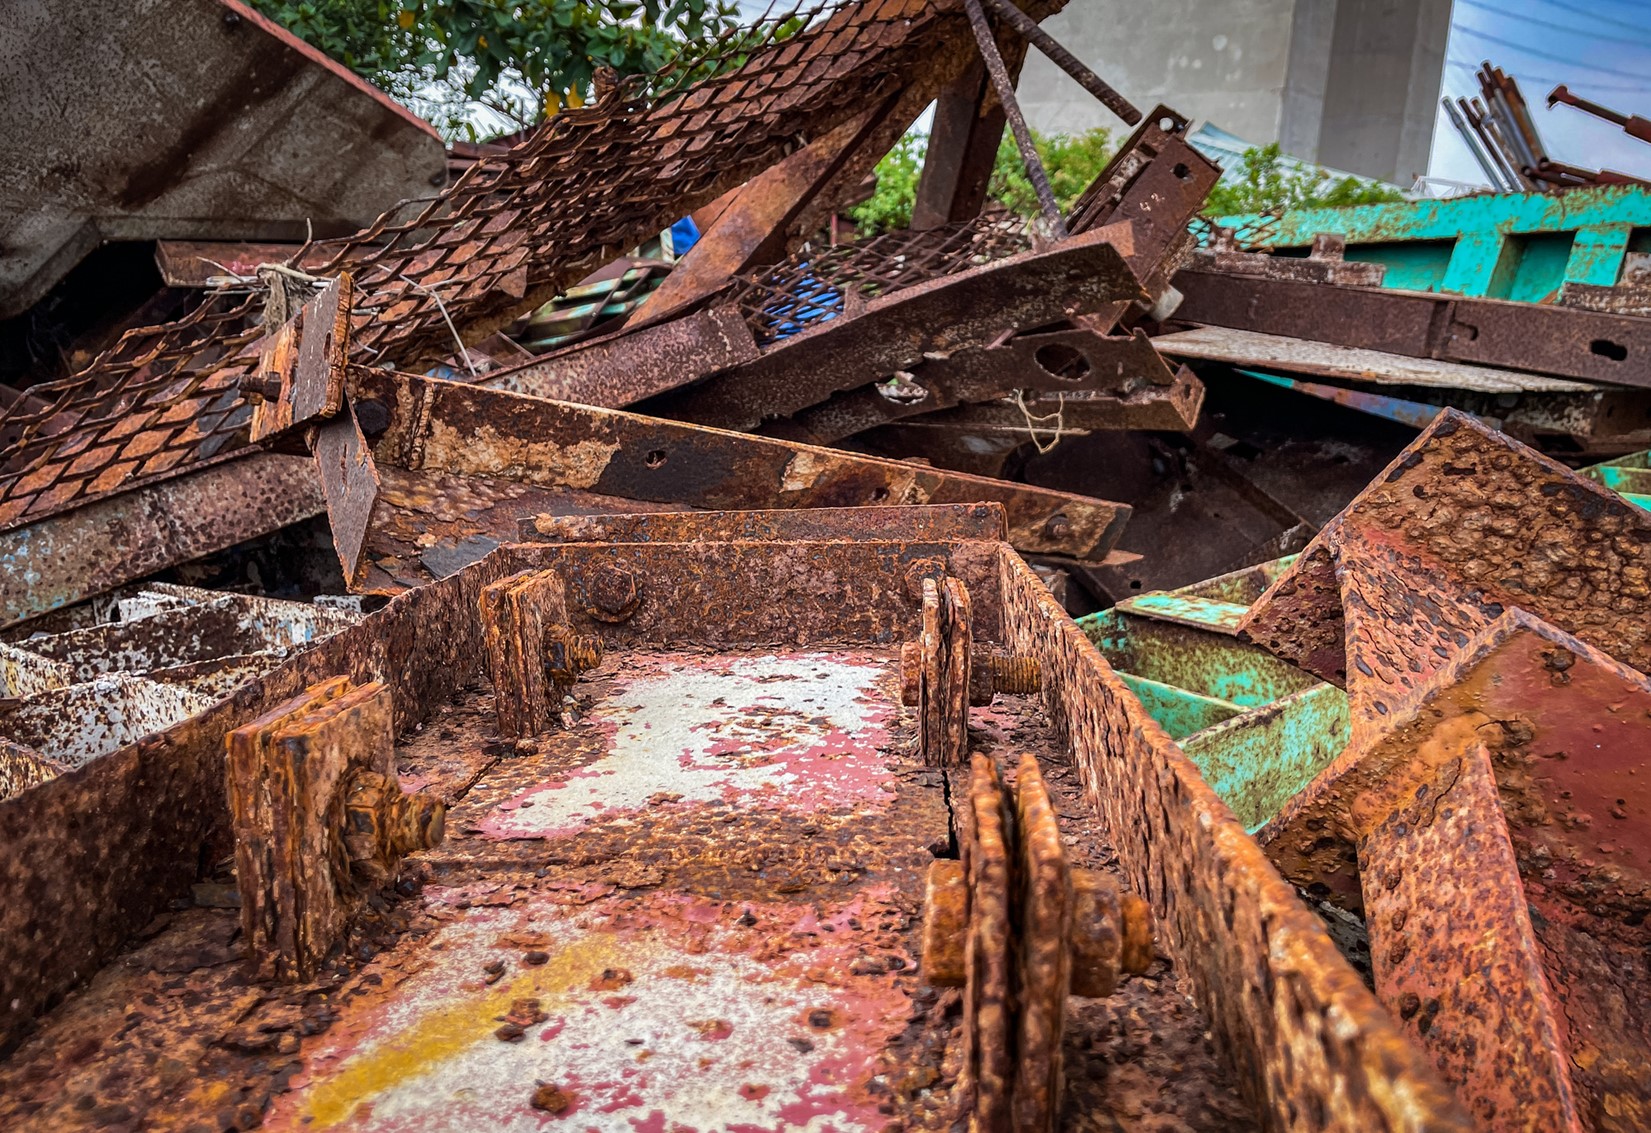 Building materials for the construction of Phuoc Khanh bridge have become rusty. Photo: Chau Tuan / Tuoi Tre